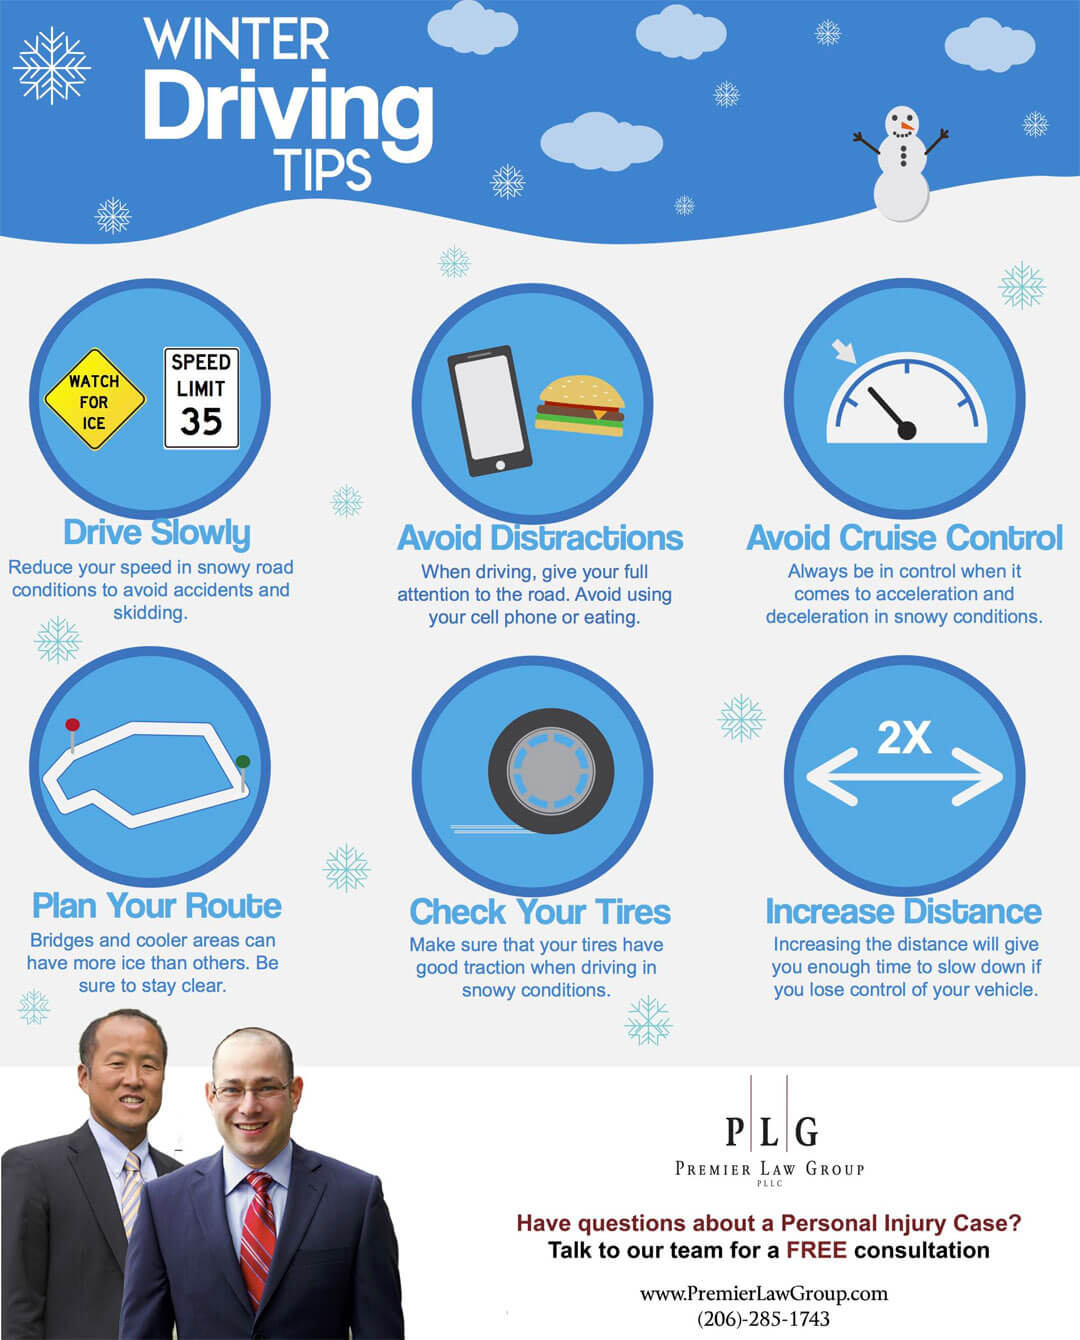 Infographic about winter driving tips provided by Premier Law Group Attorney